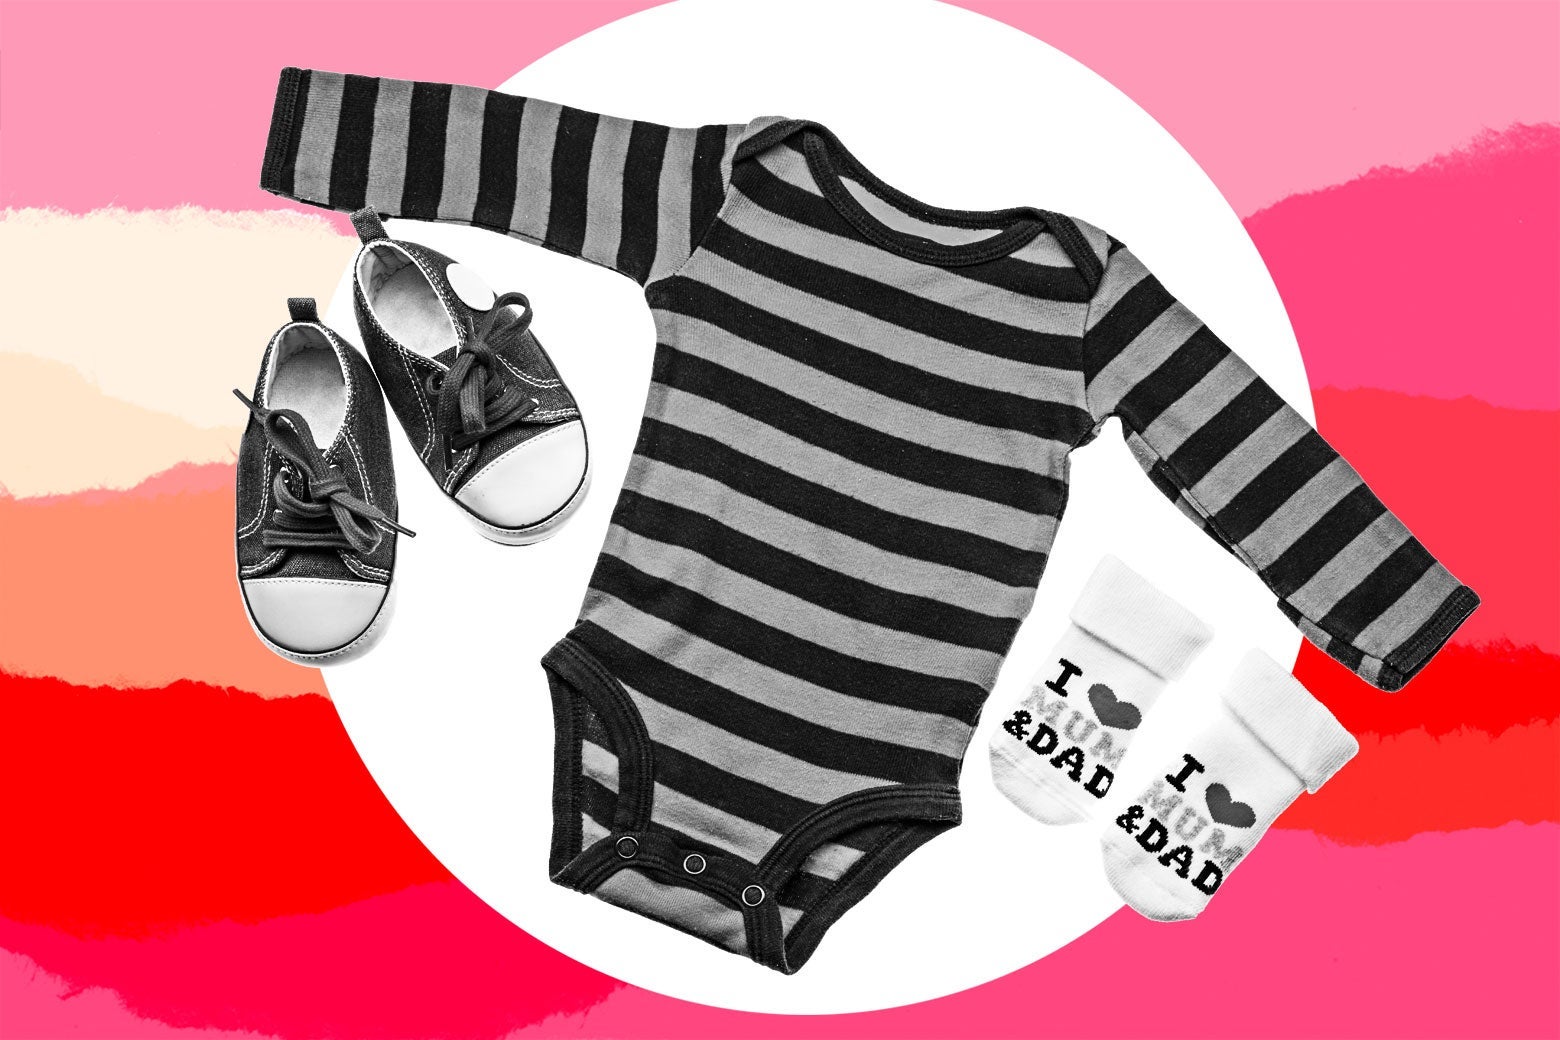 A pair of tiny sneakers, a striped onesie, and a pair of little socks.